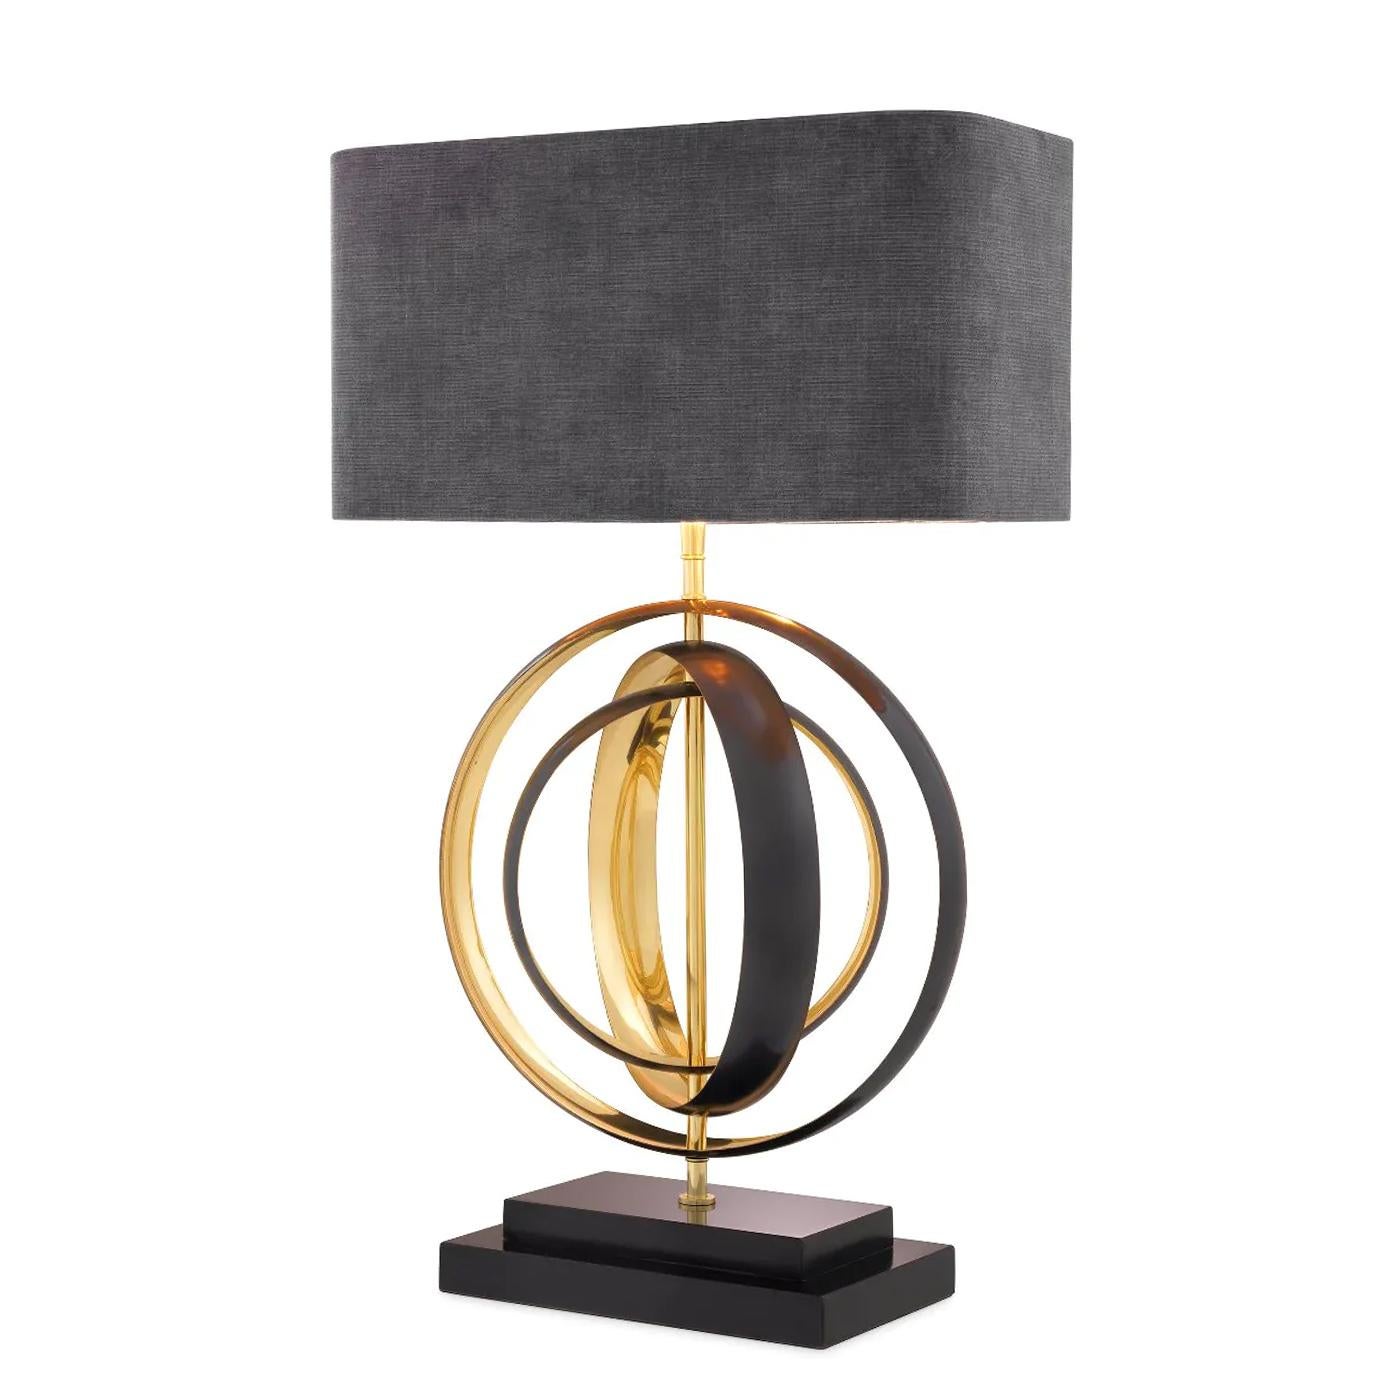 Table Lamp Shanon with structure in solid brass in polished finish
and in gunmetal finish. With granite base and with grey rib shade
included. 1 bulb, lamp holder type E27, max 40 watt, 220-240 volt,
dimmable, dimmer not included. Bulb not included.